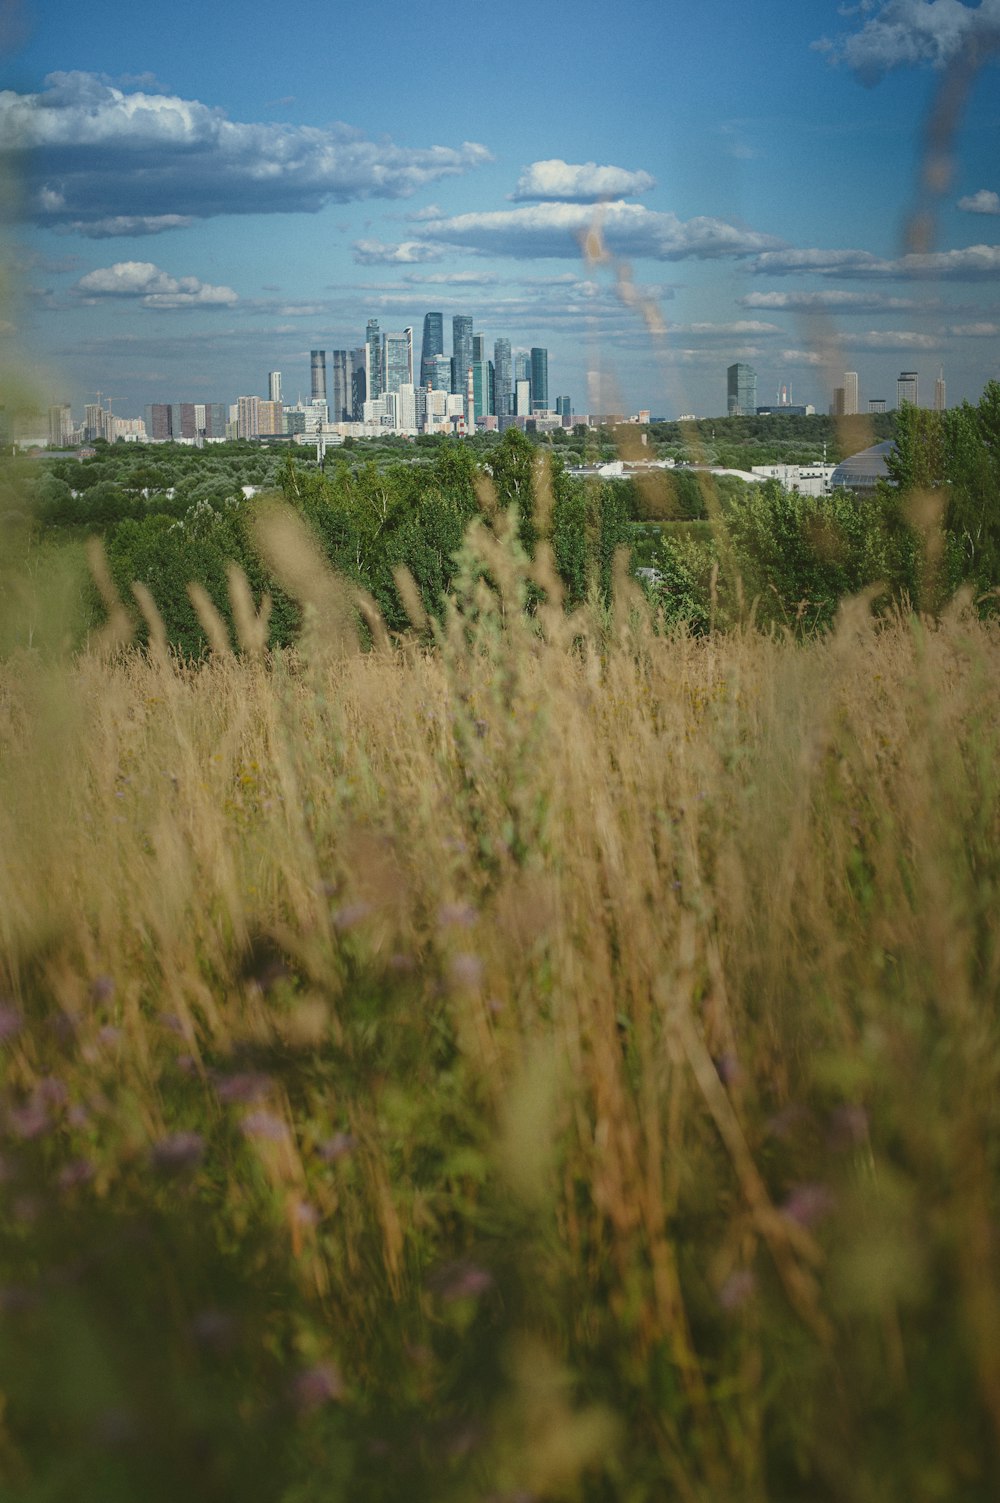 a grassy area with a city in the background